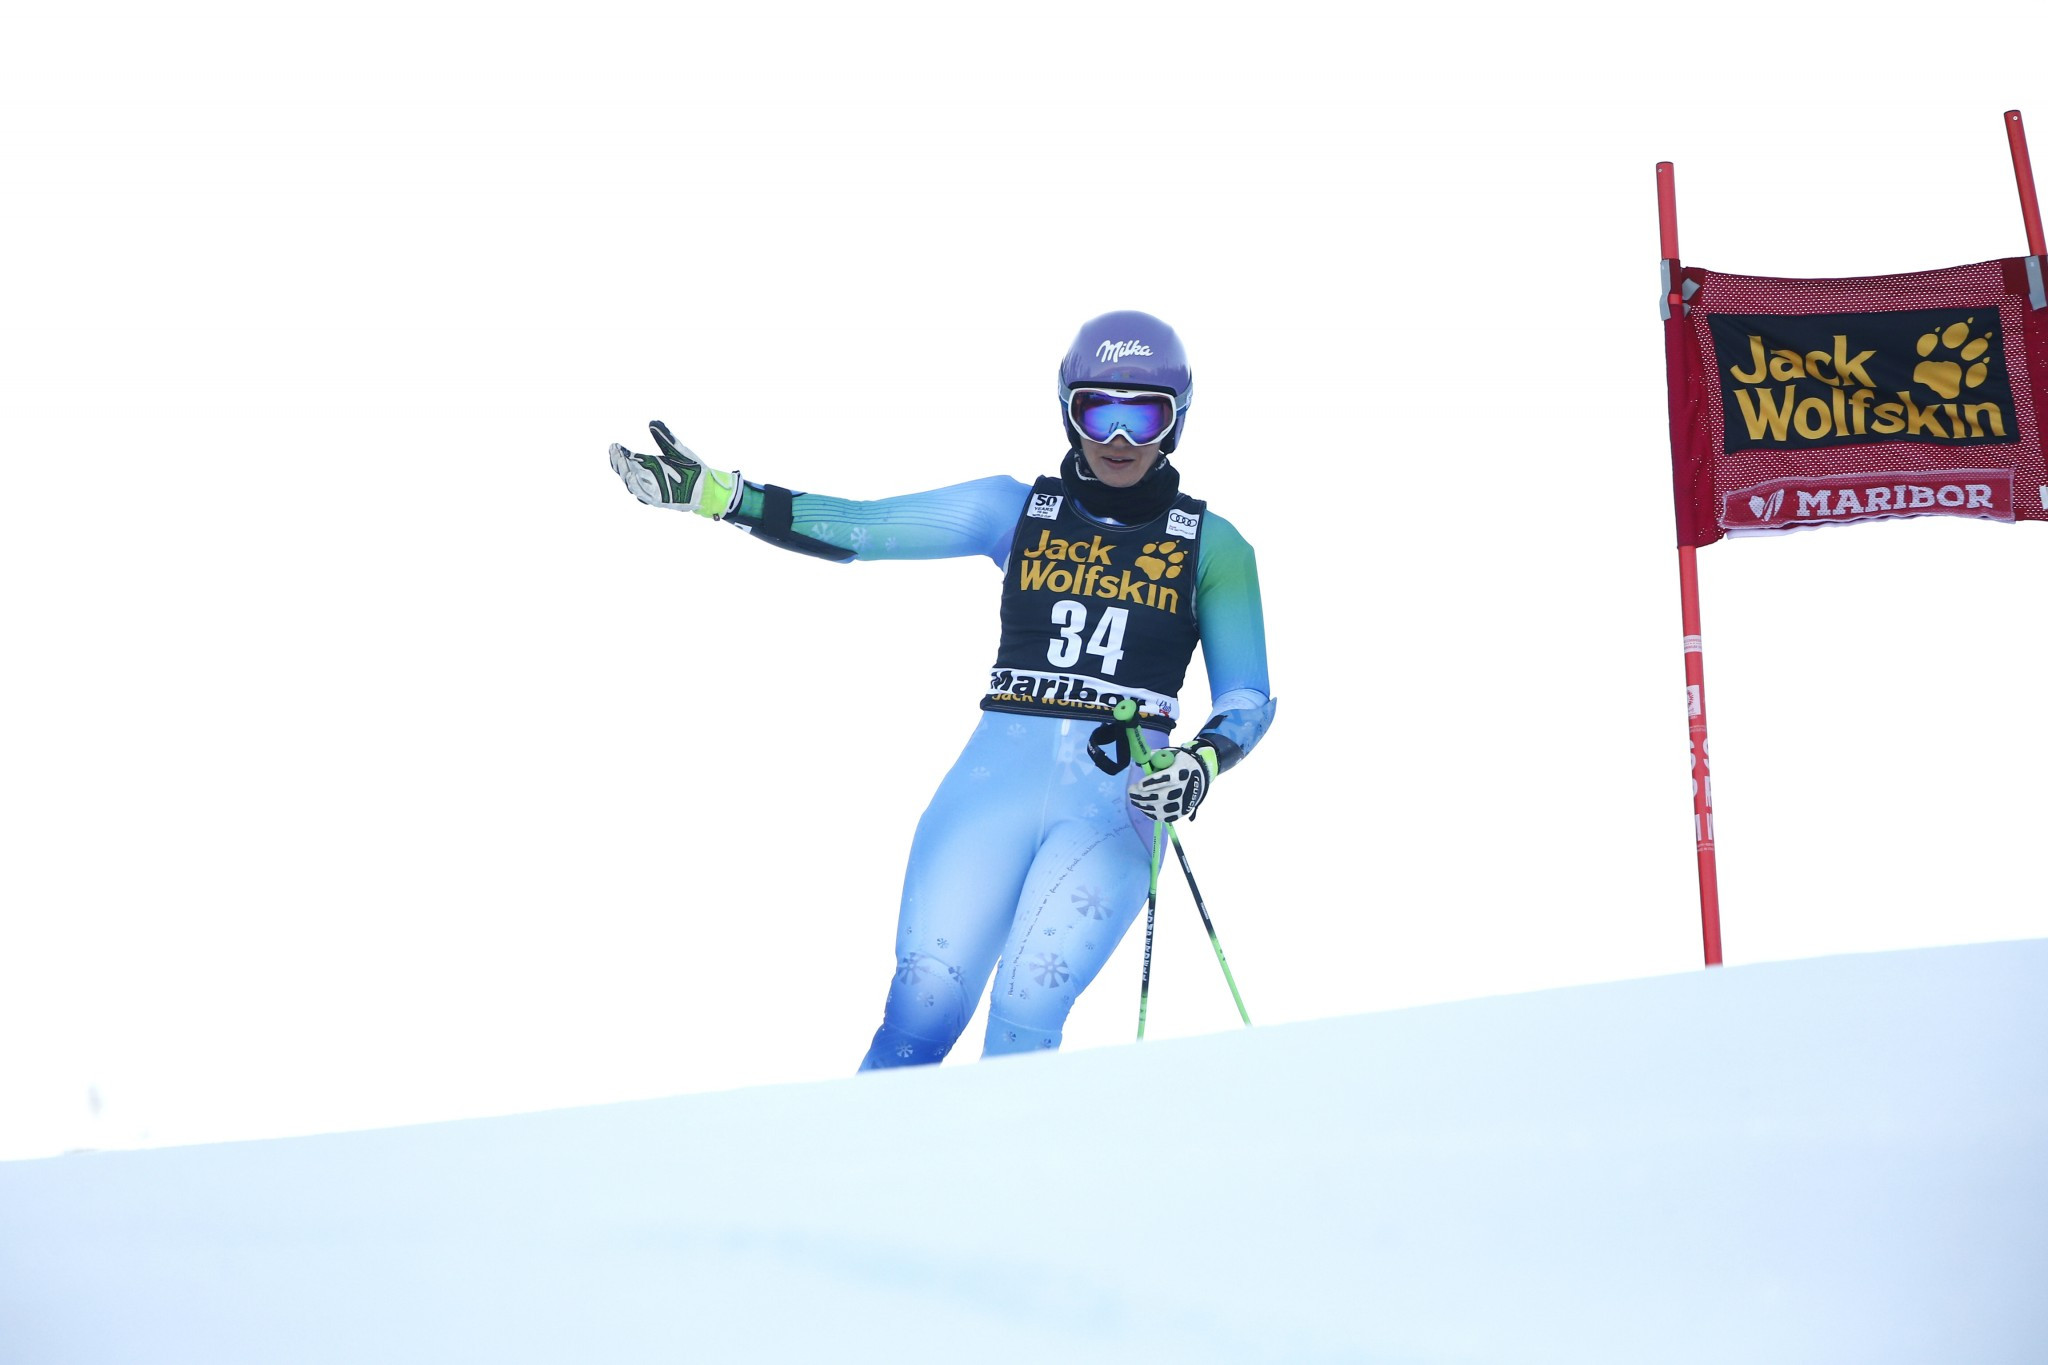 Slovenia will be competing without two-time champion Tina Maze at Pyeongchang 2018 ©Getty Images